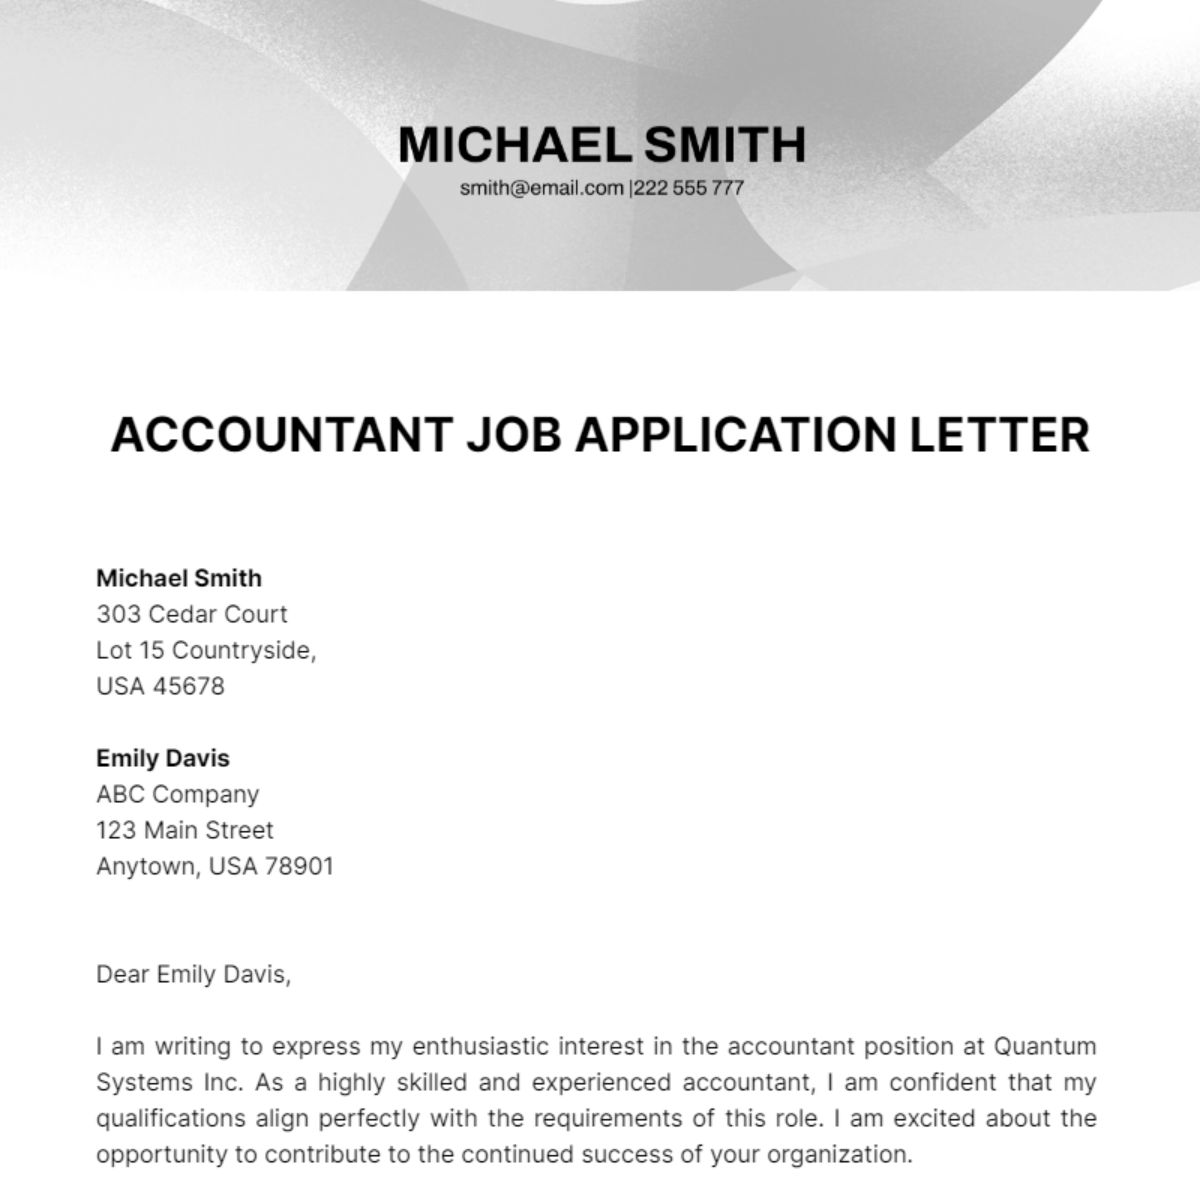 Accountant Job Application Letter  Template